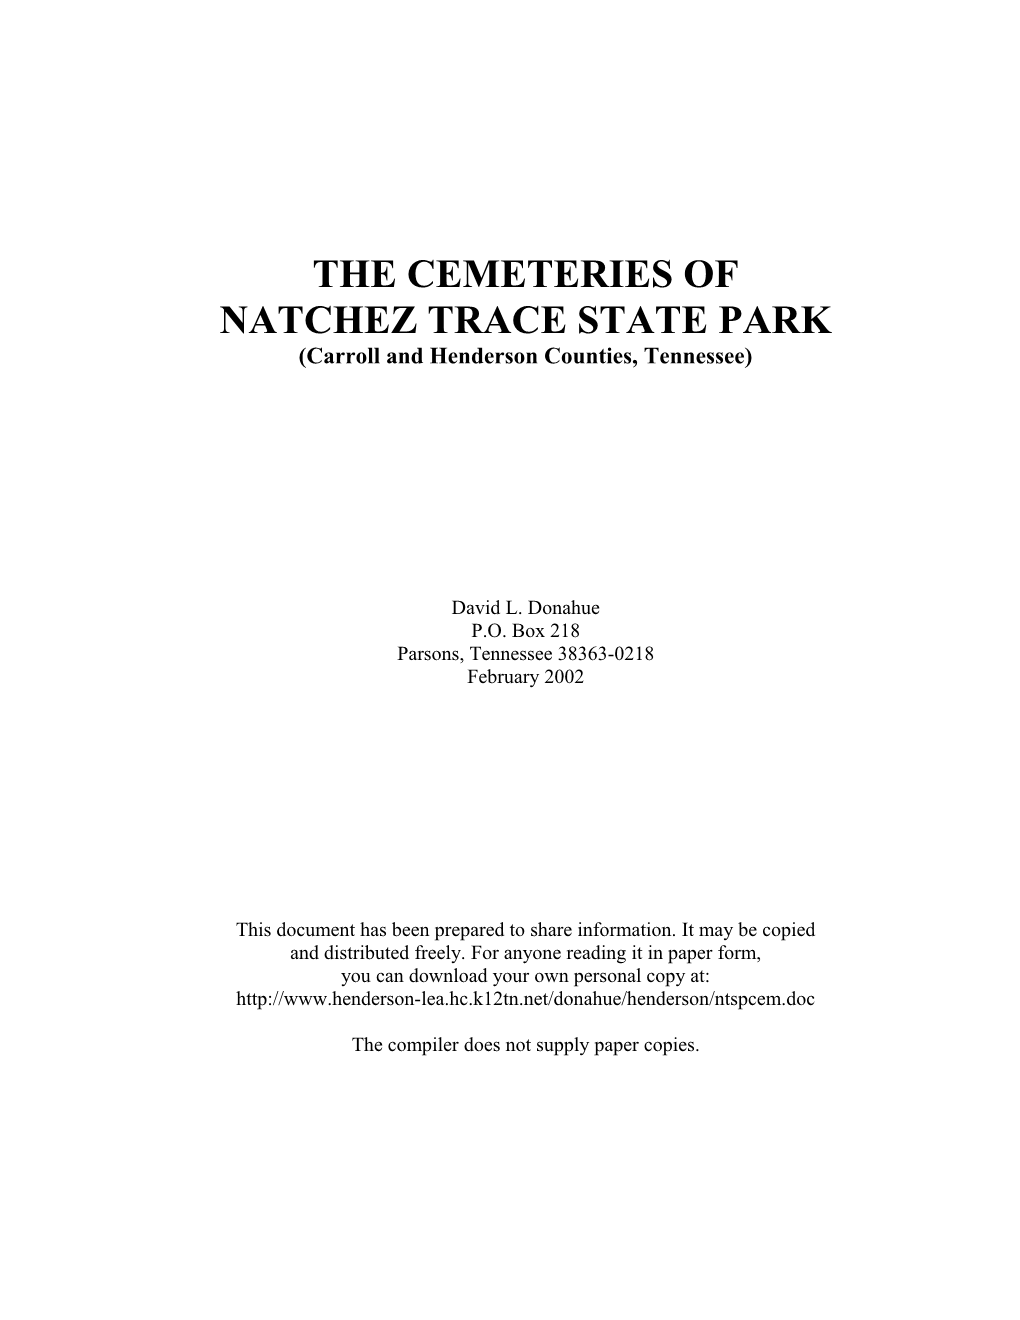 The Cemeteries of Natchez Trace